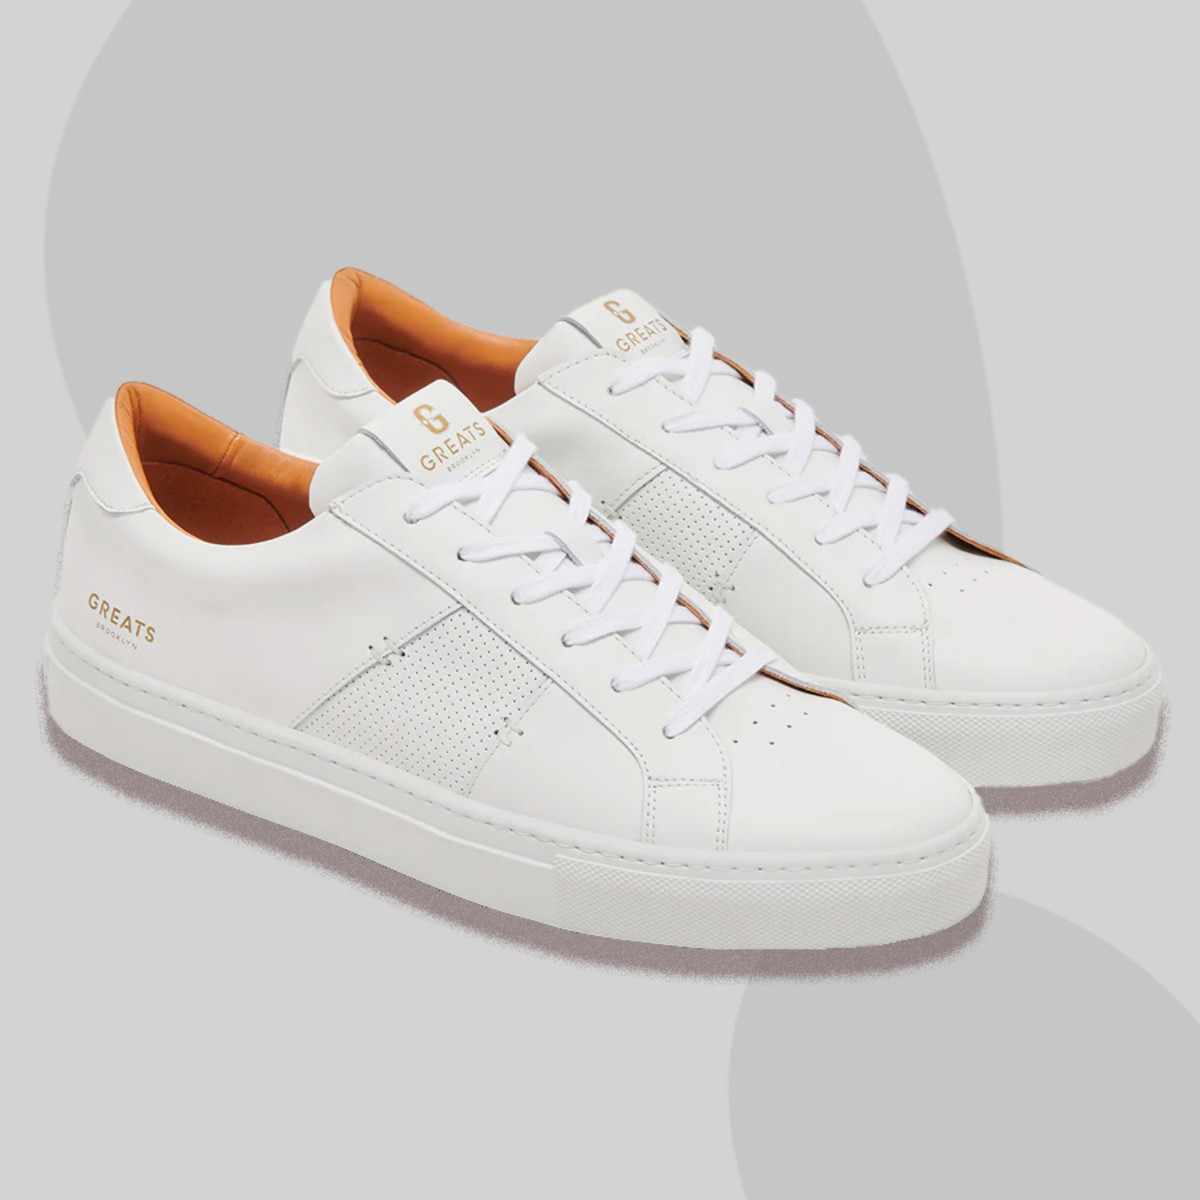 18 Best White Sneakers For Men: Affordable Options in 2023